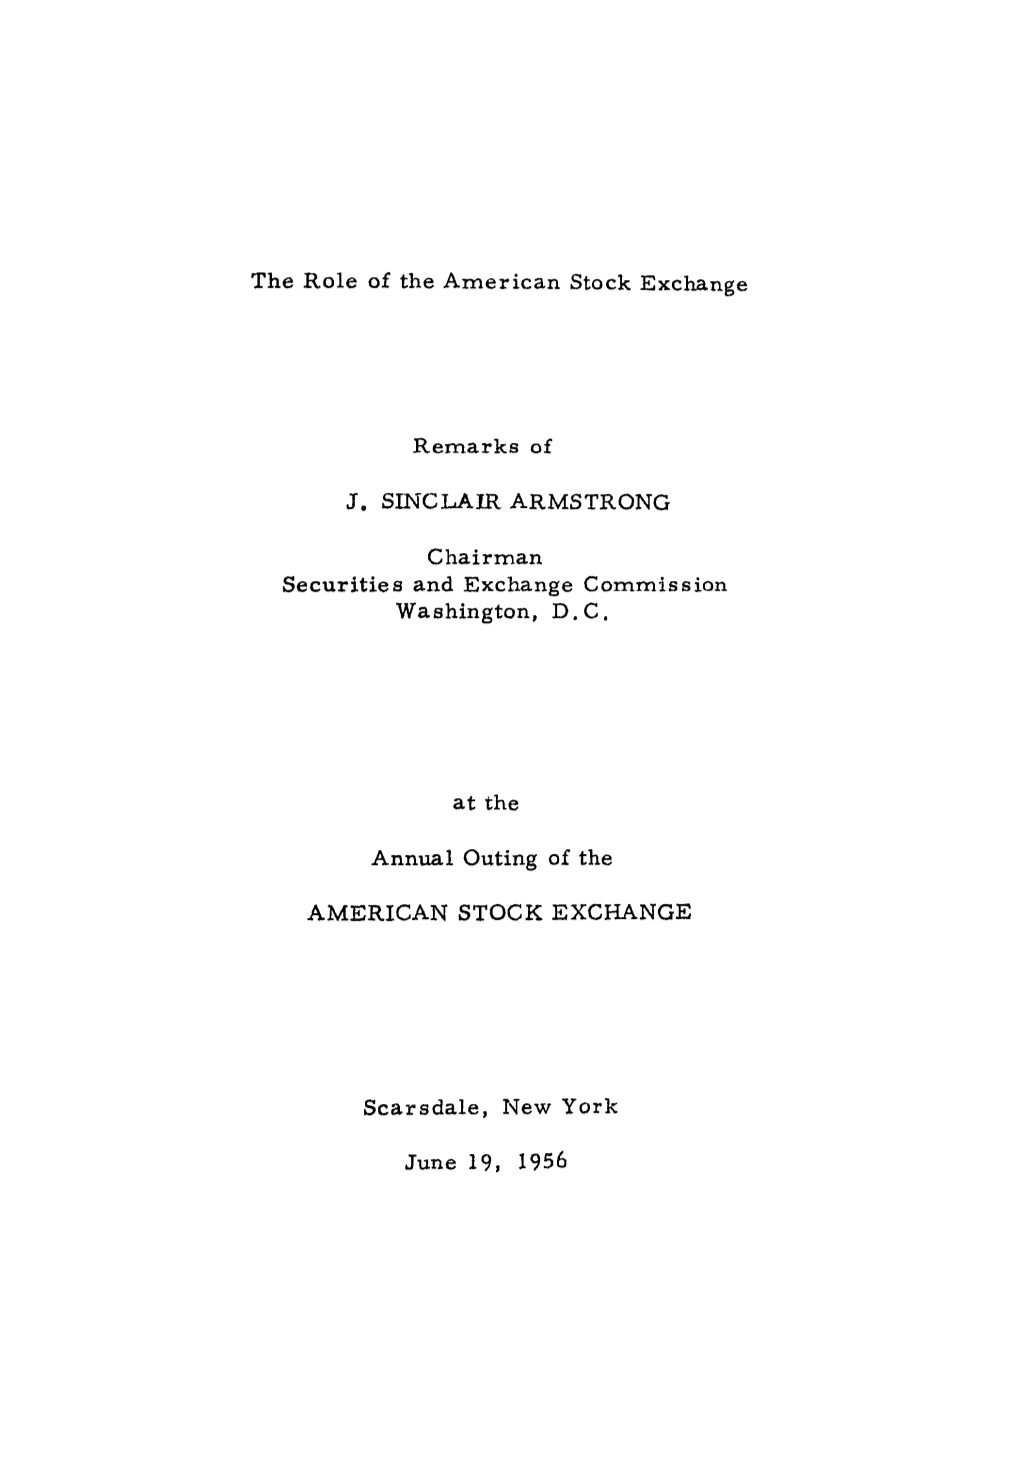 Speech: the Role of the American Stock Exchange, June 19, 1956